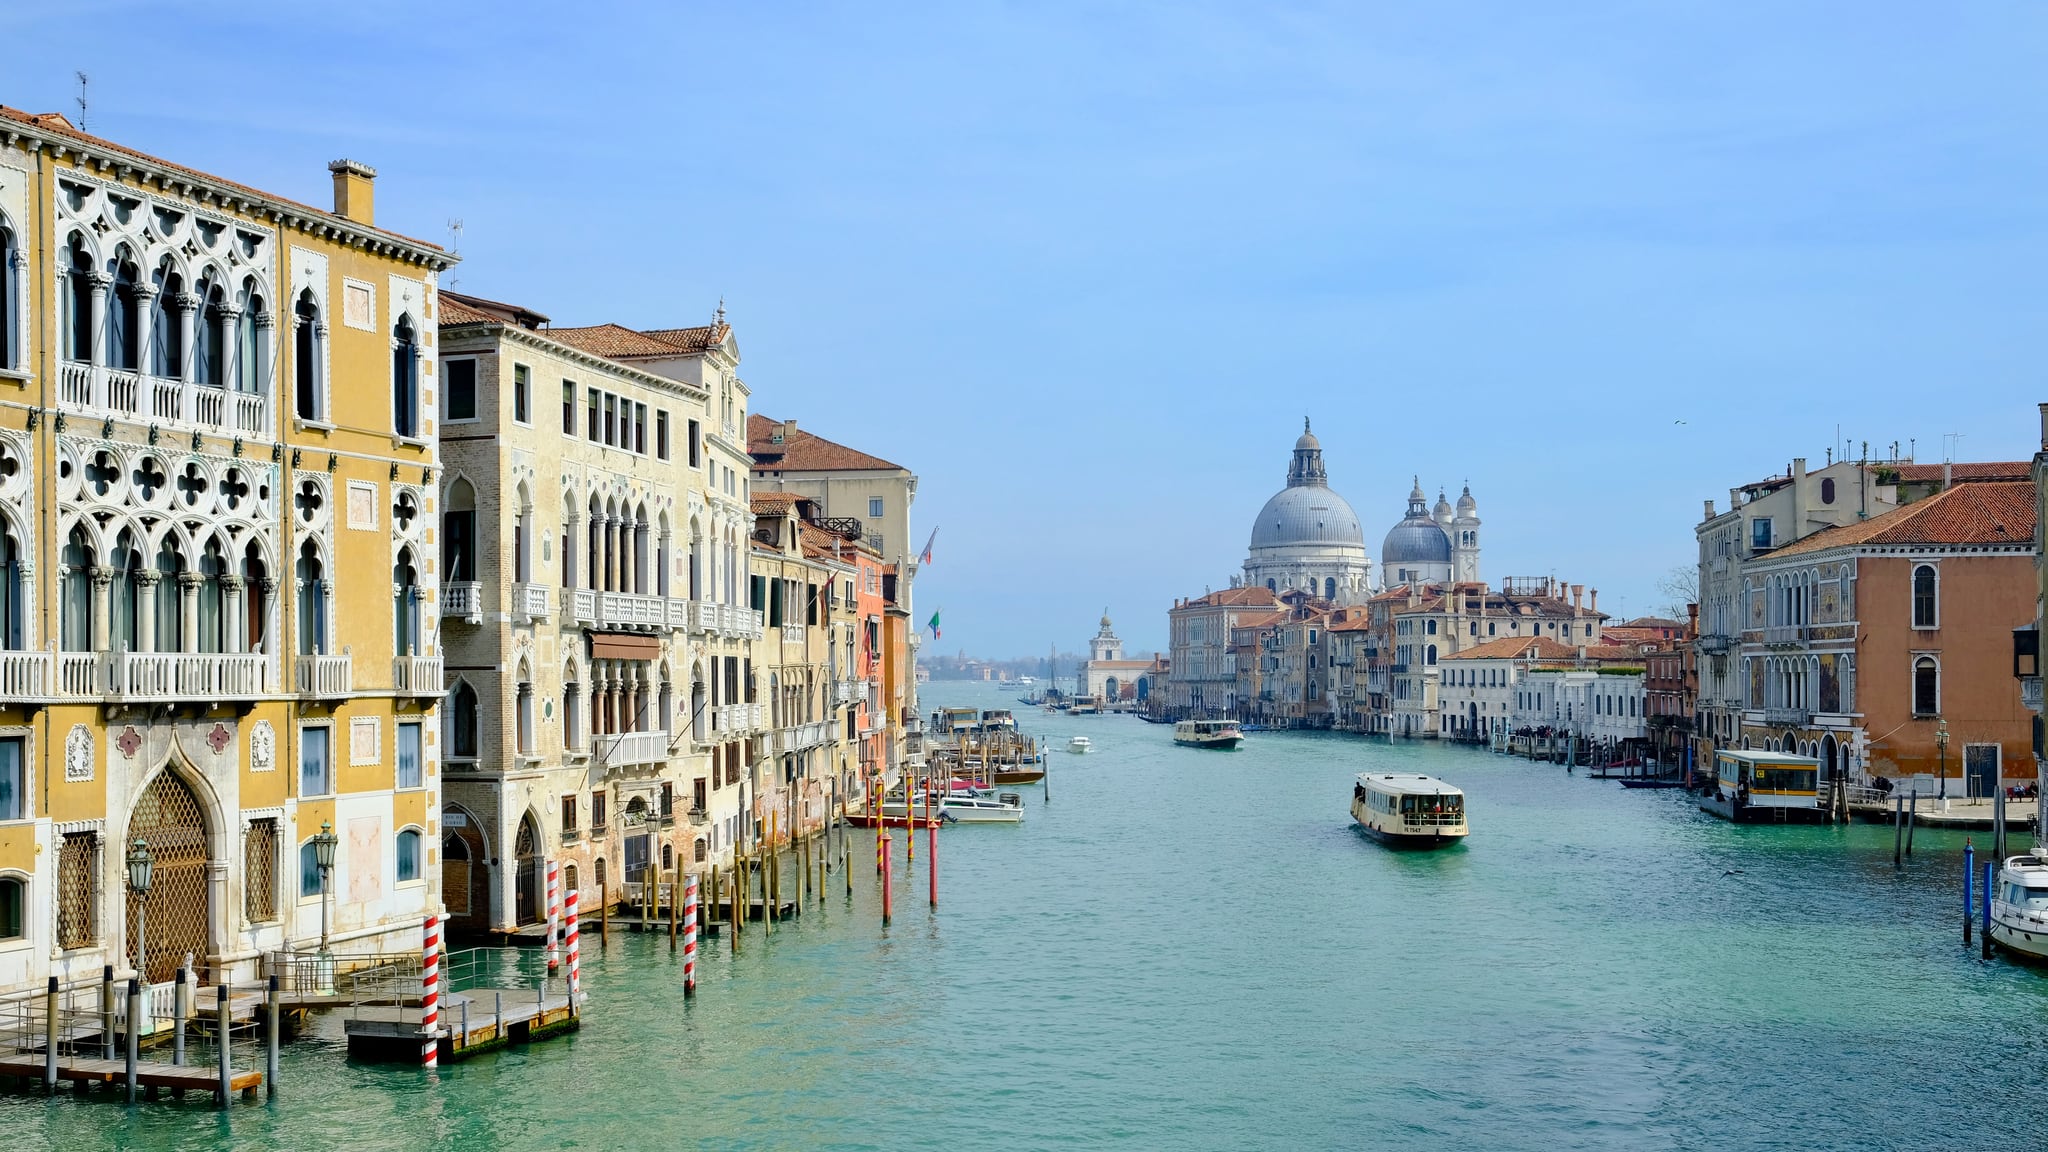 View from Ponte dell’Accademia in Venice